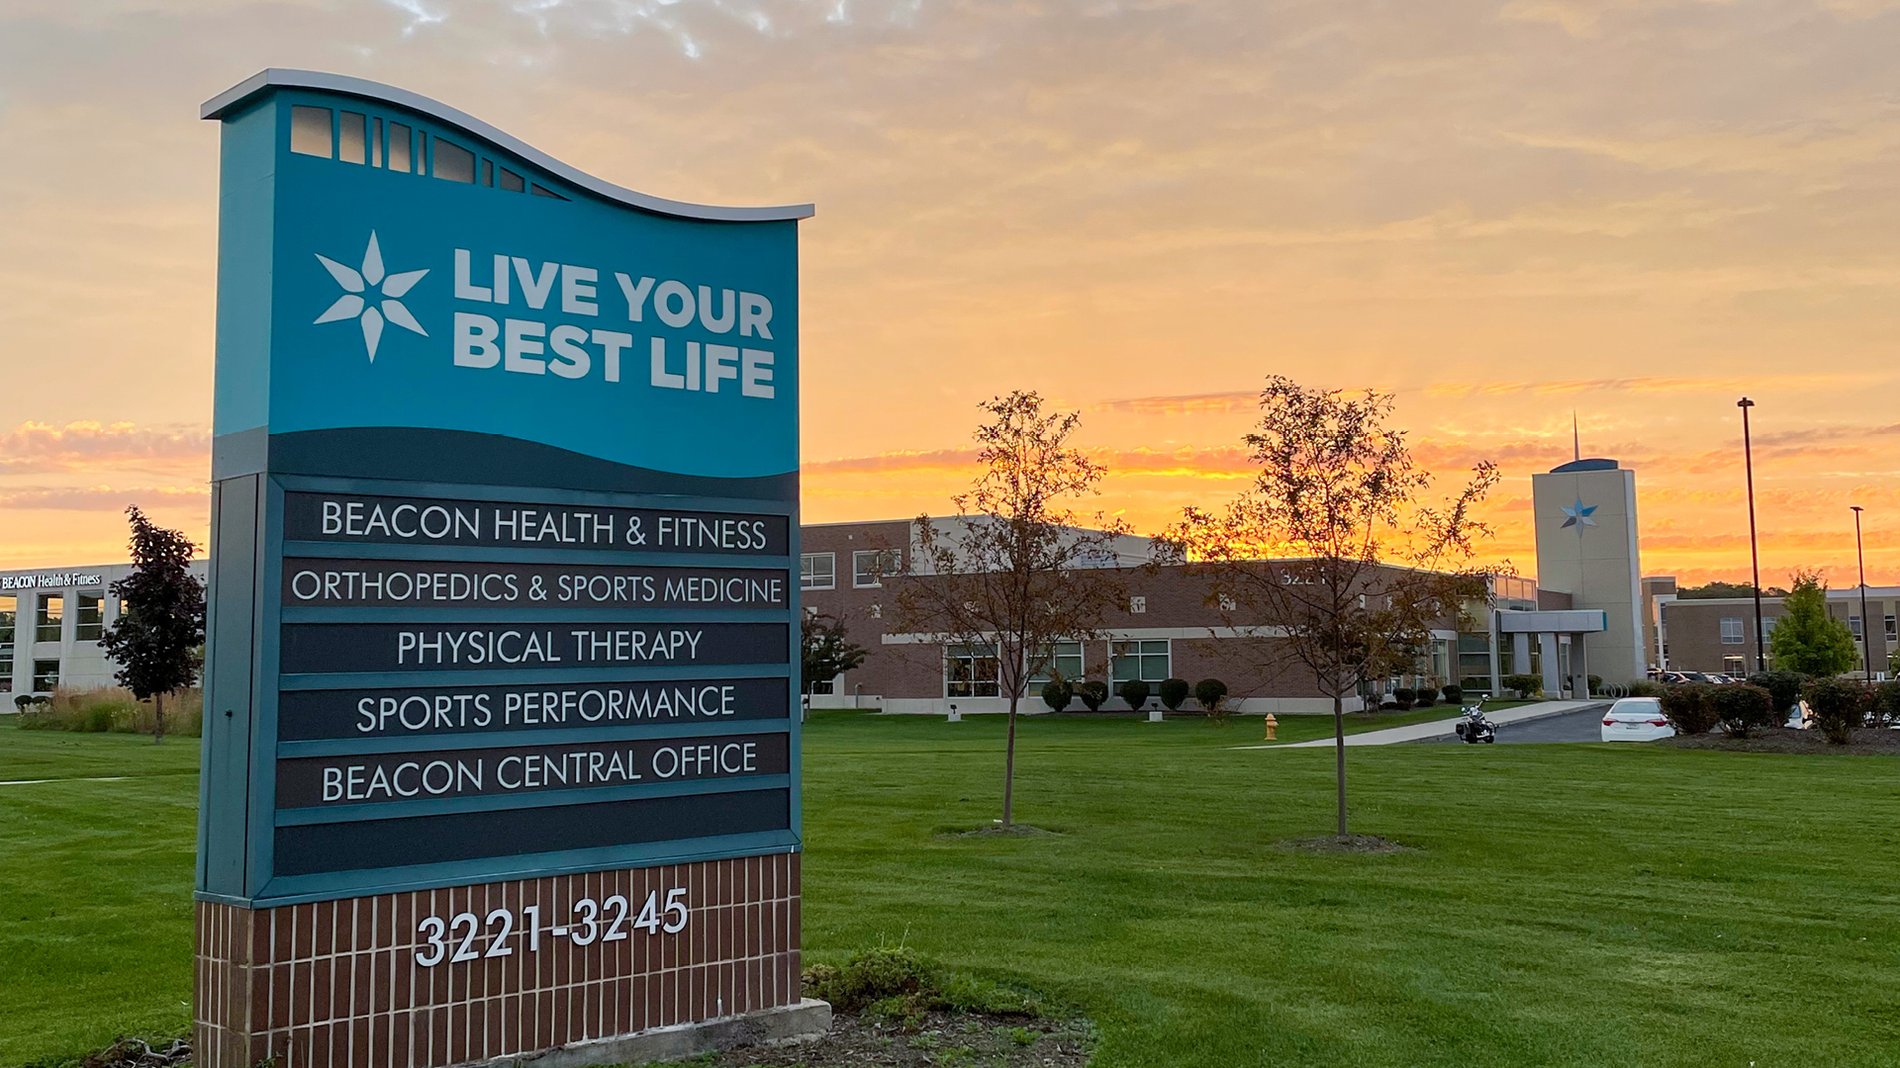 A teal sign in front of Beacon Health and Fitness in Granger says, "Live your best life." It lists orthopedics, sports medicine, physical therapy, sports performance and beacon central office.